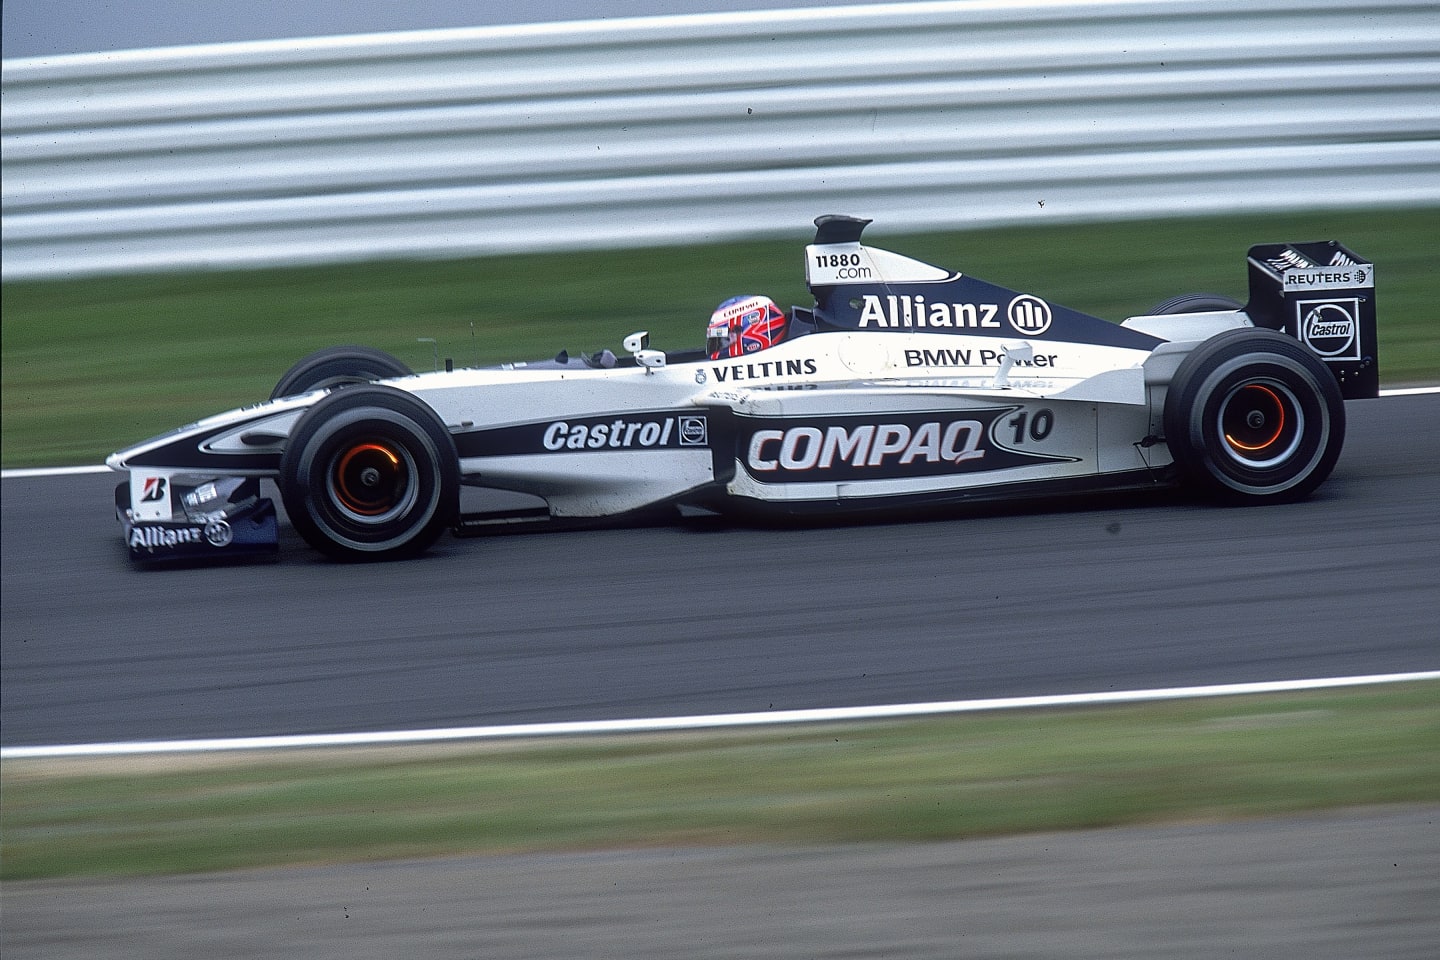 In 2000, Williams switched to blue and white from a more garish scheme the year before, with BMW engines behind the driver